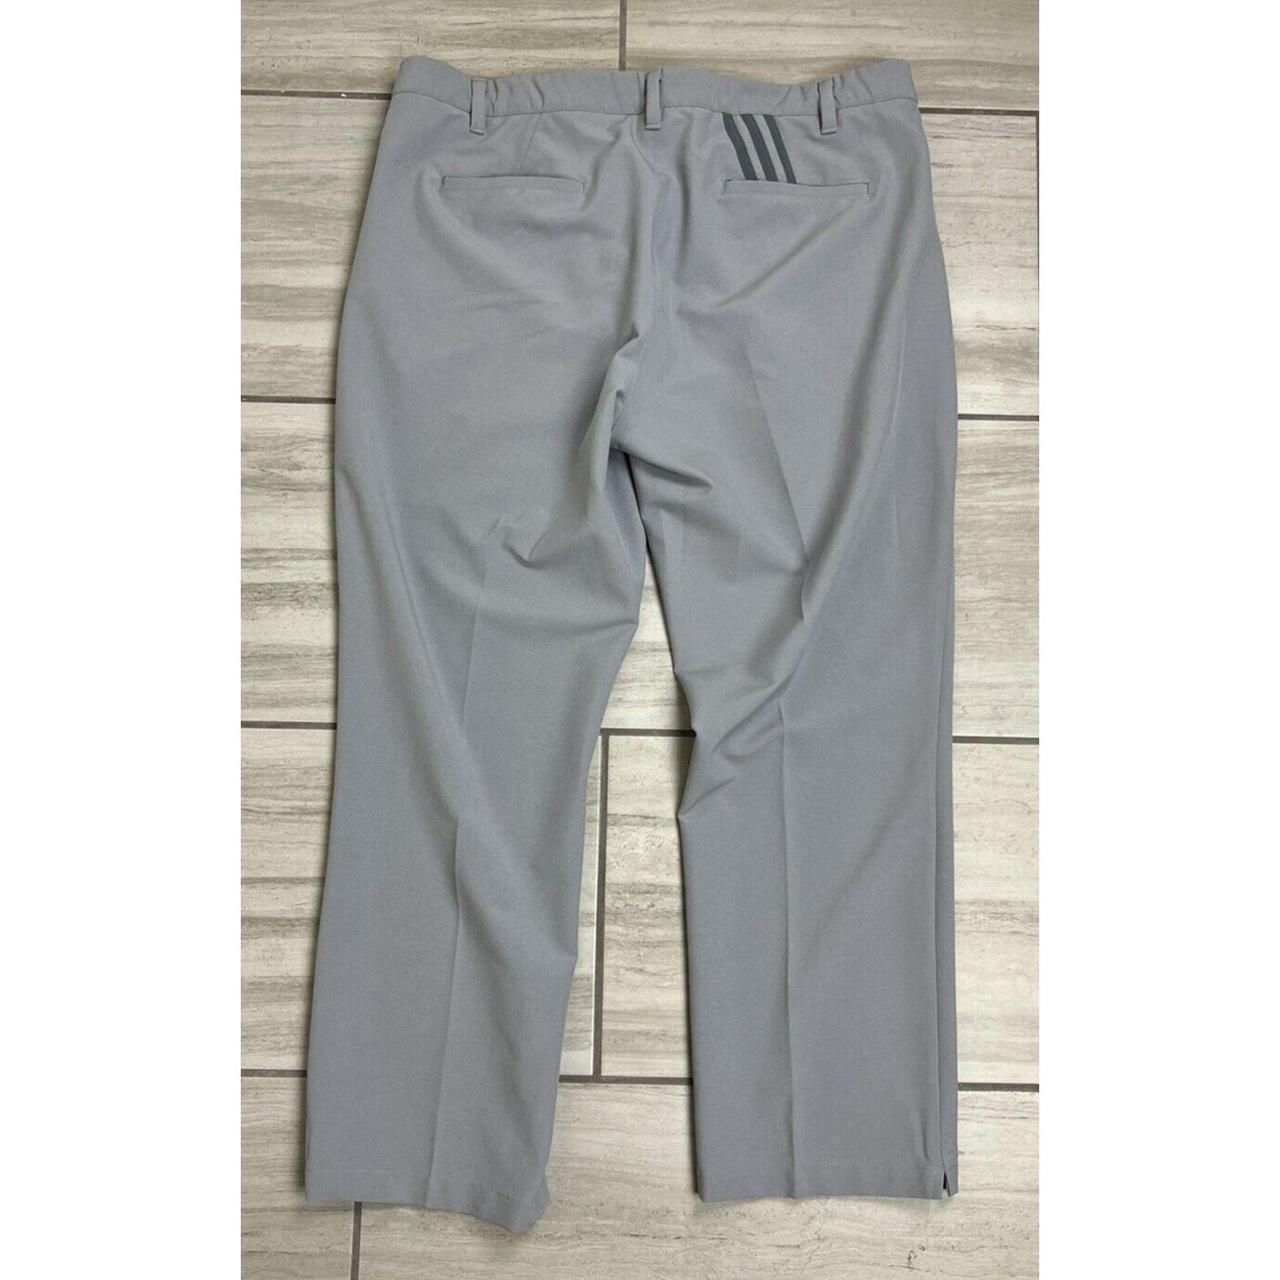 Adidas Casual Track Pants Trousers Trouserstrousers - Buy Adidas Casual  Track Pants Trousers Trouserstrousers online in India